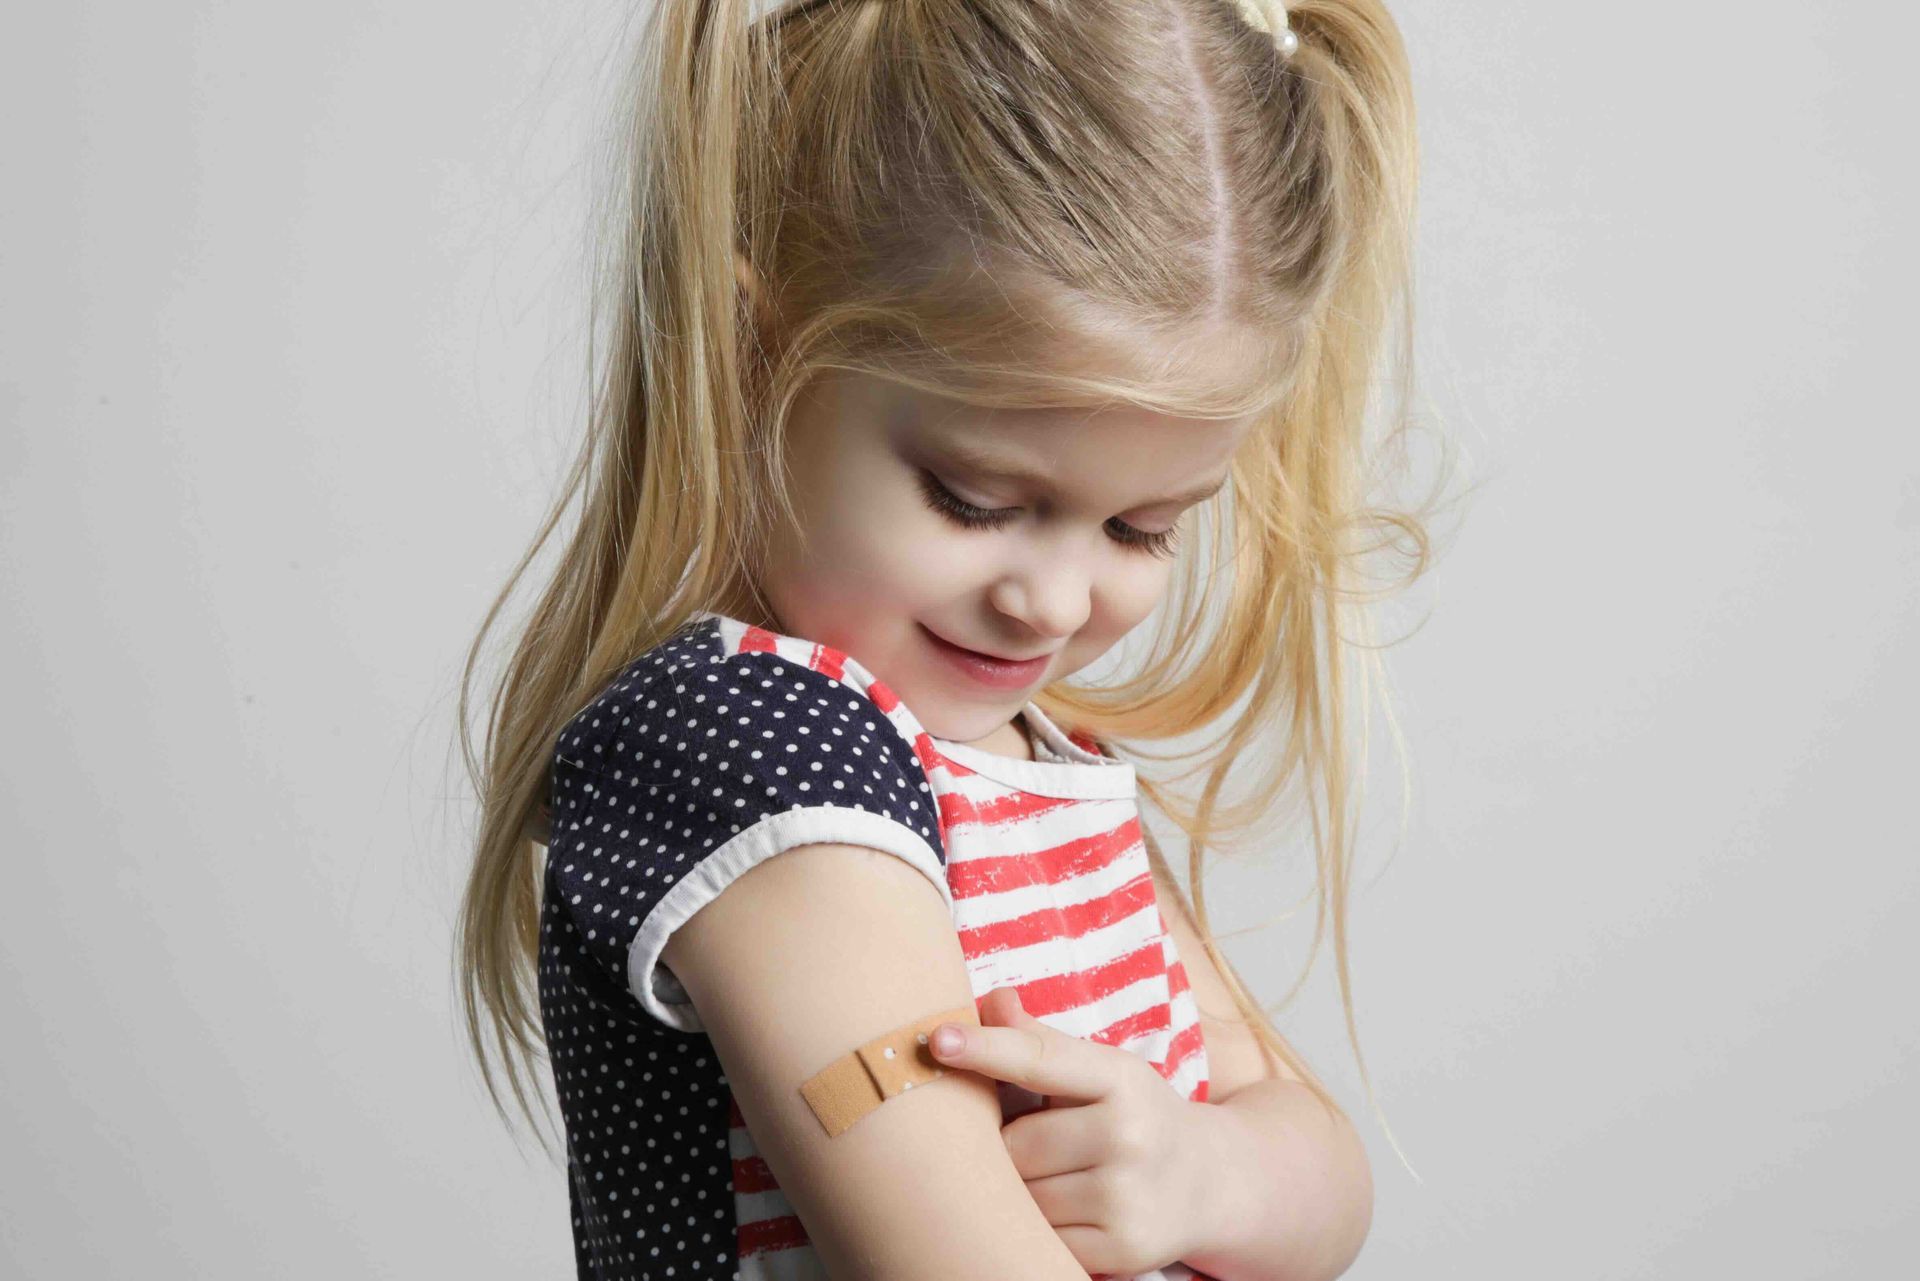 A little girl with a bandage on her arm.